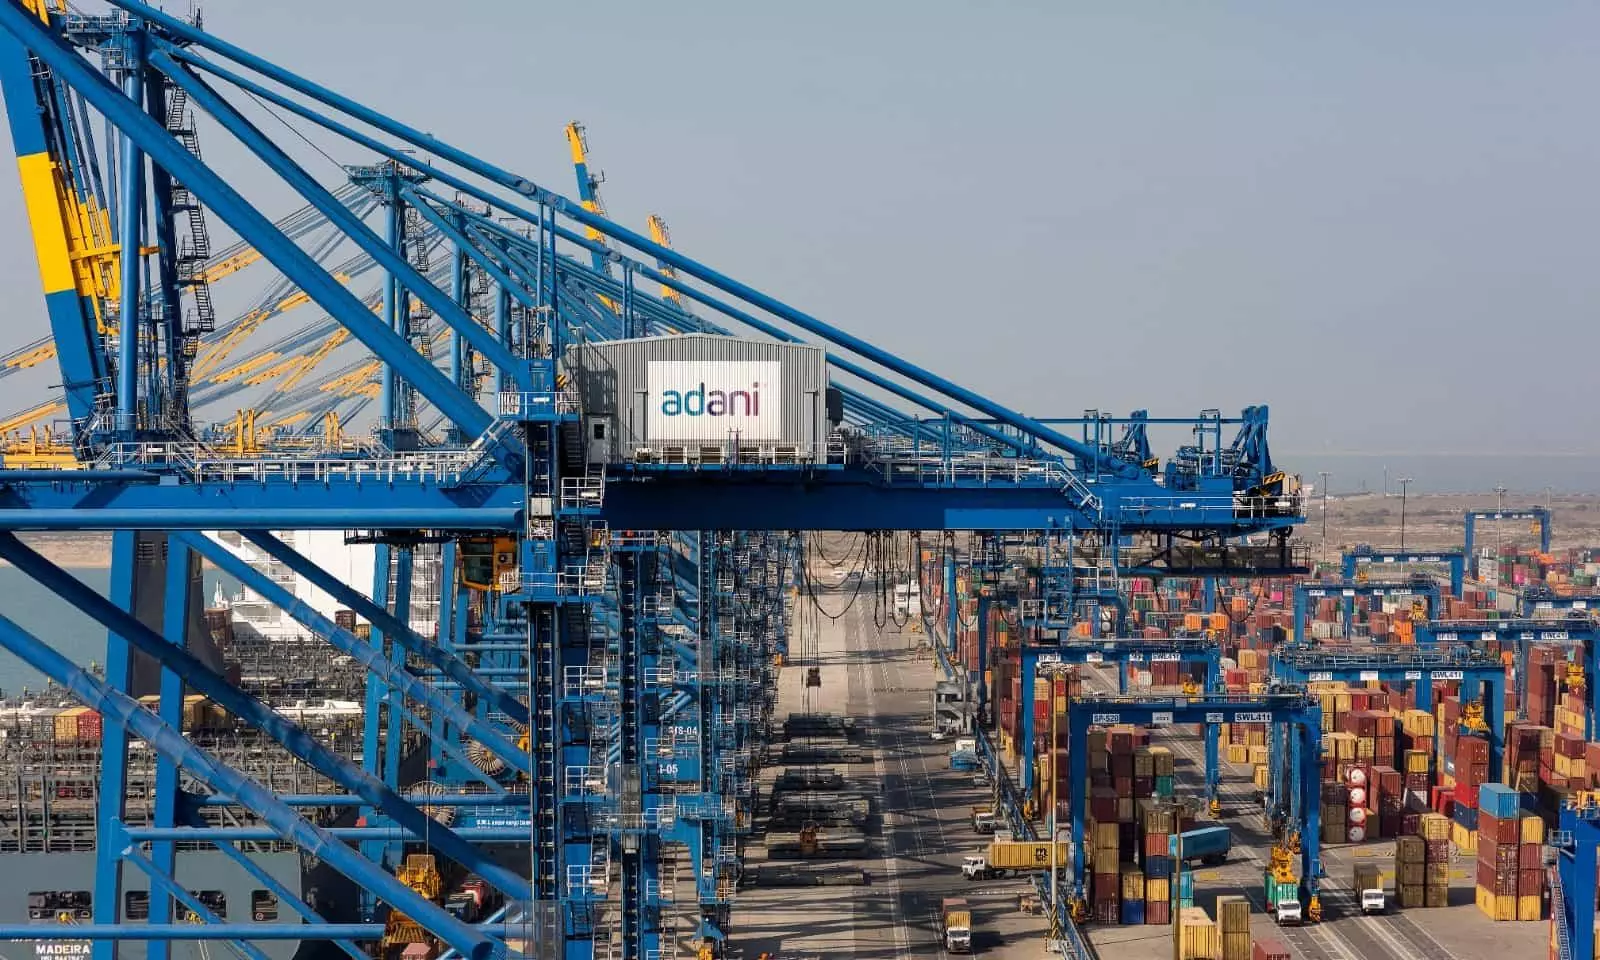 Adani Ports gets top position for climate actions, environmental performance